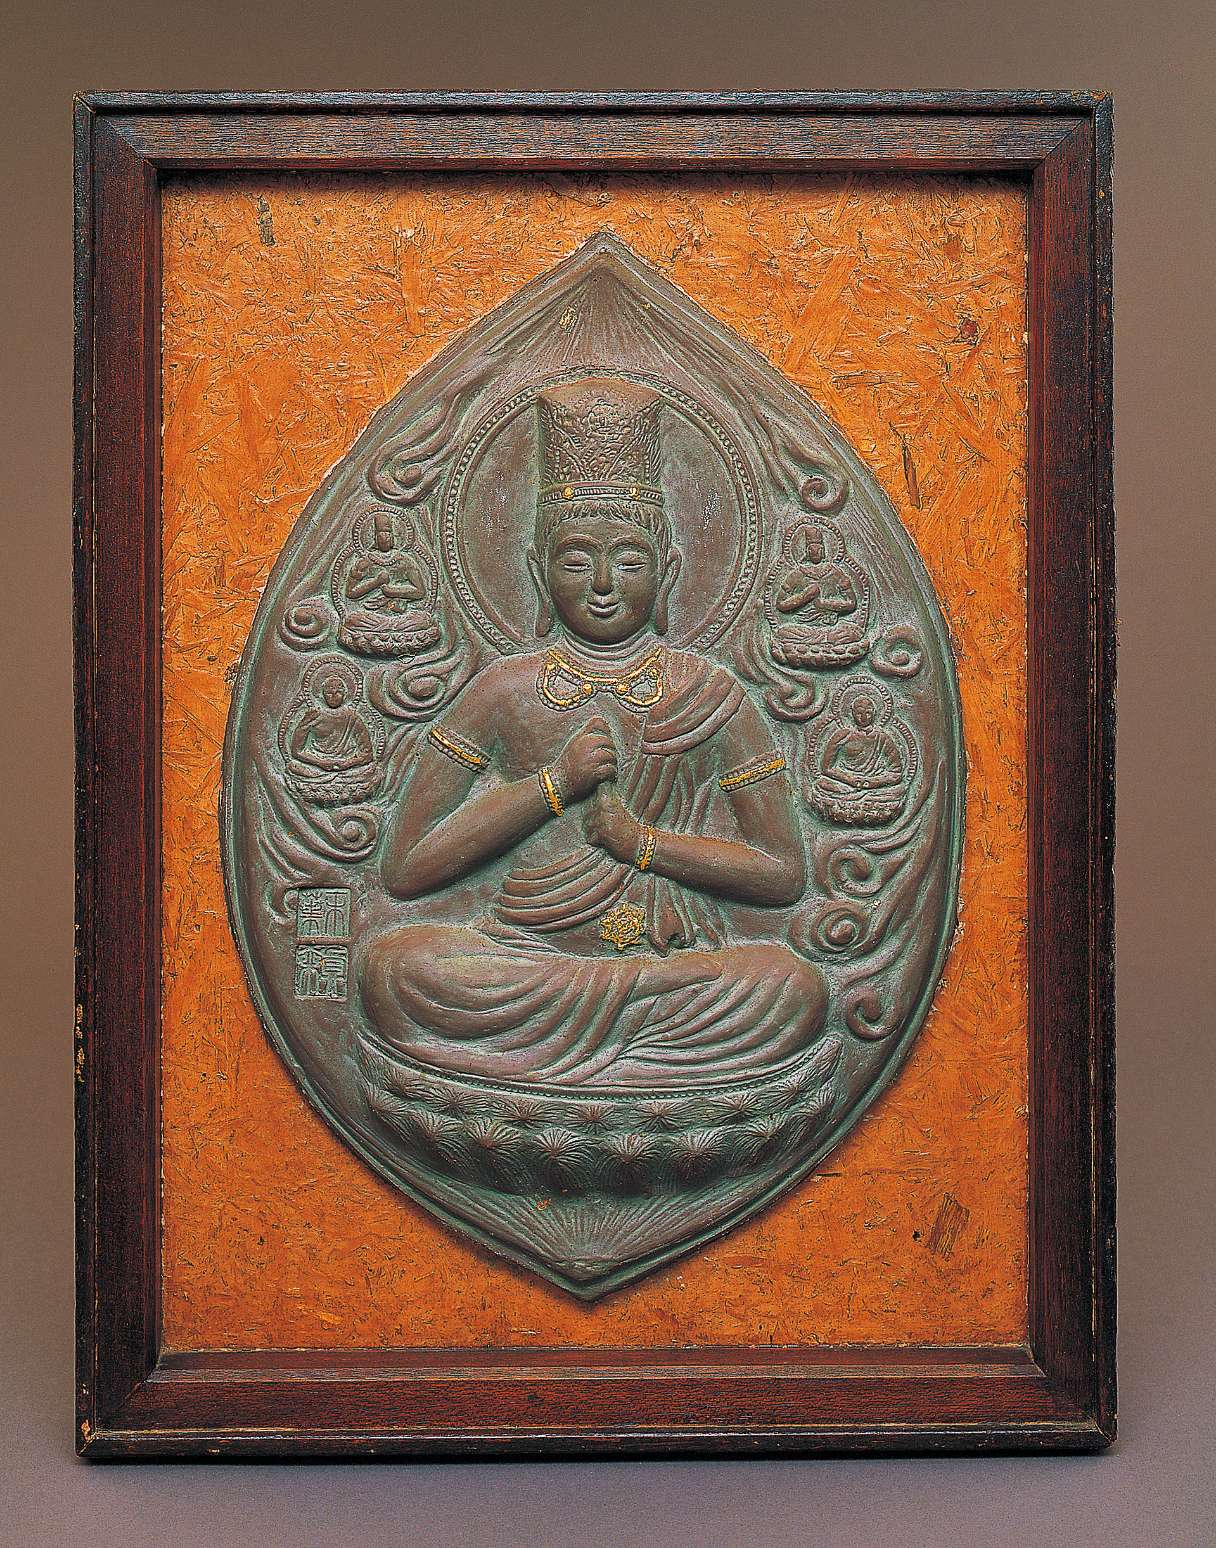 An upright almond-shaped grayish relief of a buddha wearing a tall crown sitting cross-legged, grasping his upturned left index finger with his right hand, surrounded by clouds and four smaller buddhas.